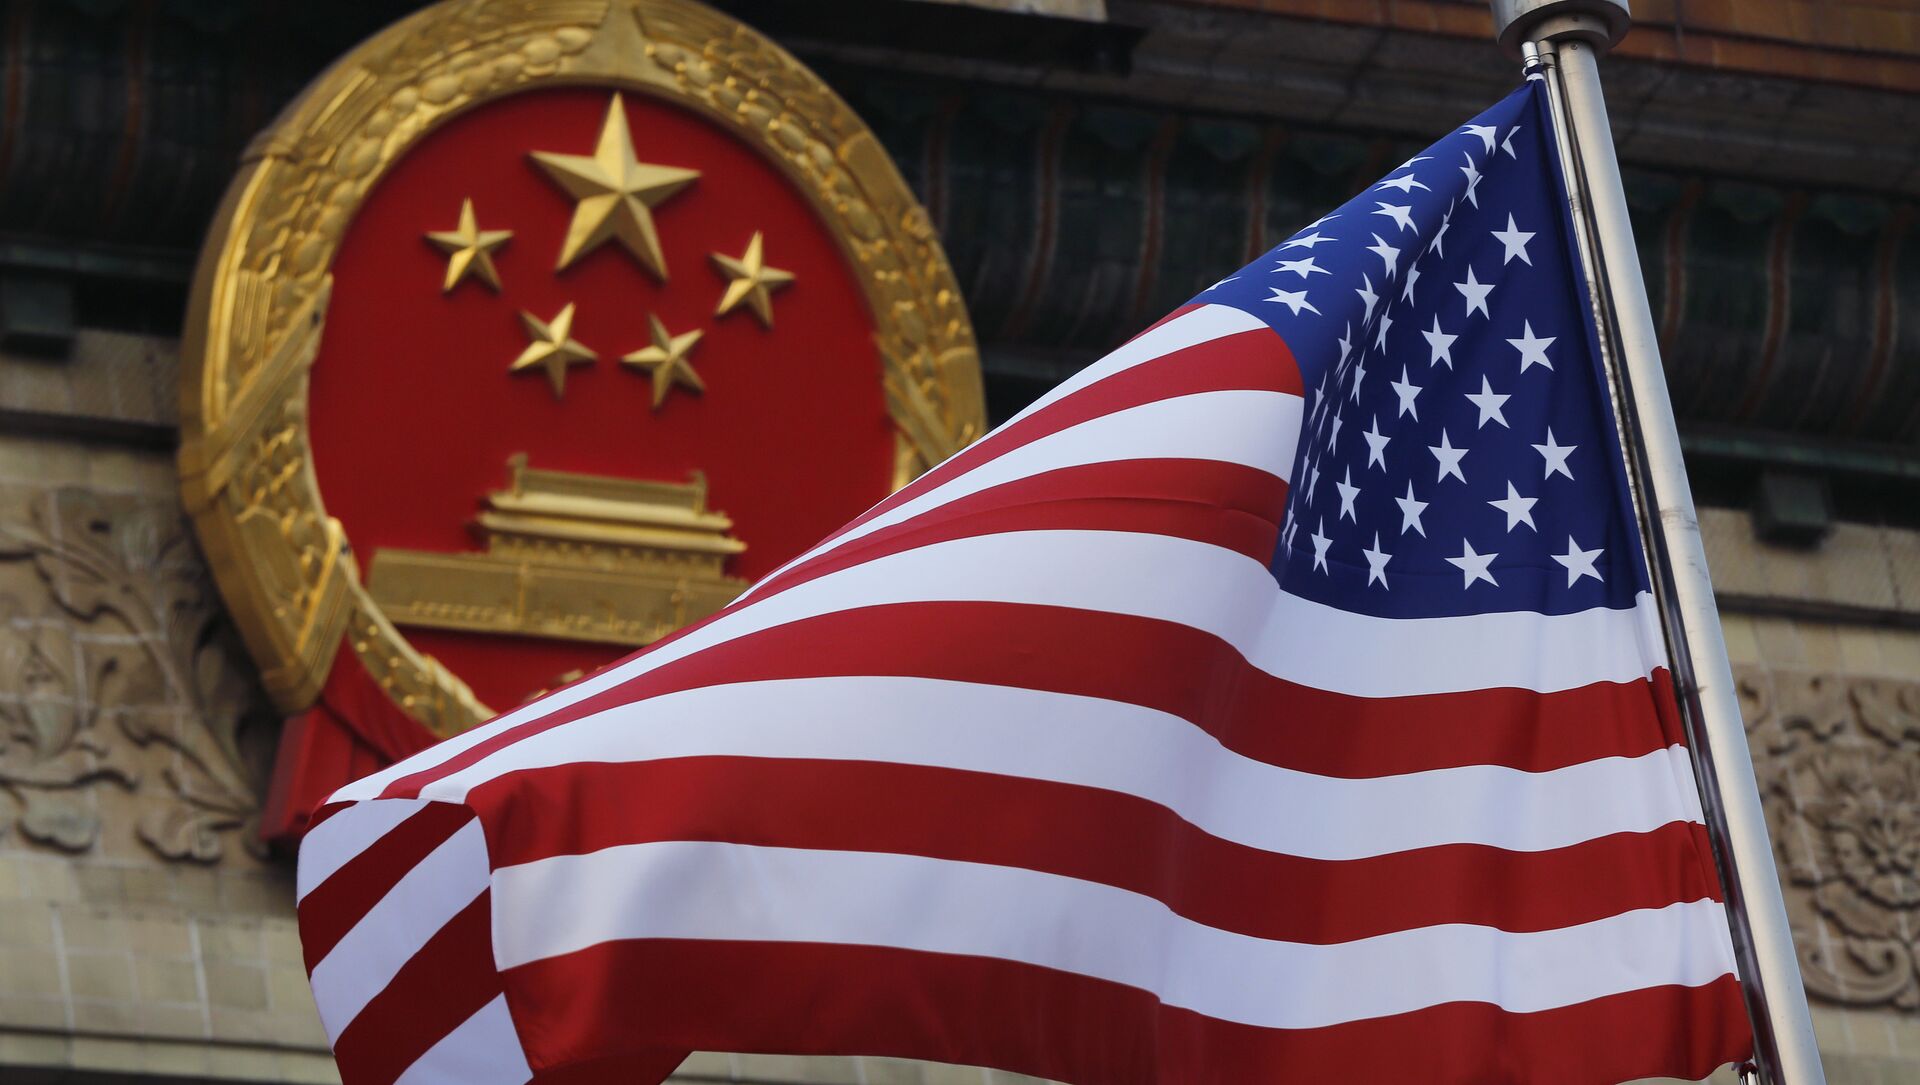 FILE - In this Nov. 9, 2017 file photo, an American flag is flown next to the Chinese national emblem during a welcome ceremony for visiting U.S. President Donald Trump outside the Great Hall of the People in Beijing - Sputnik Moldova-România, 1920, 19.05.2021